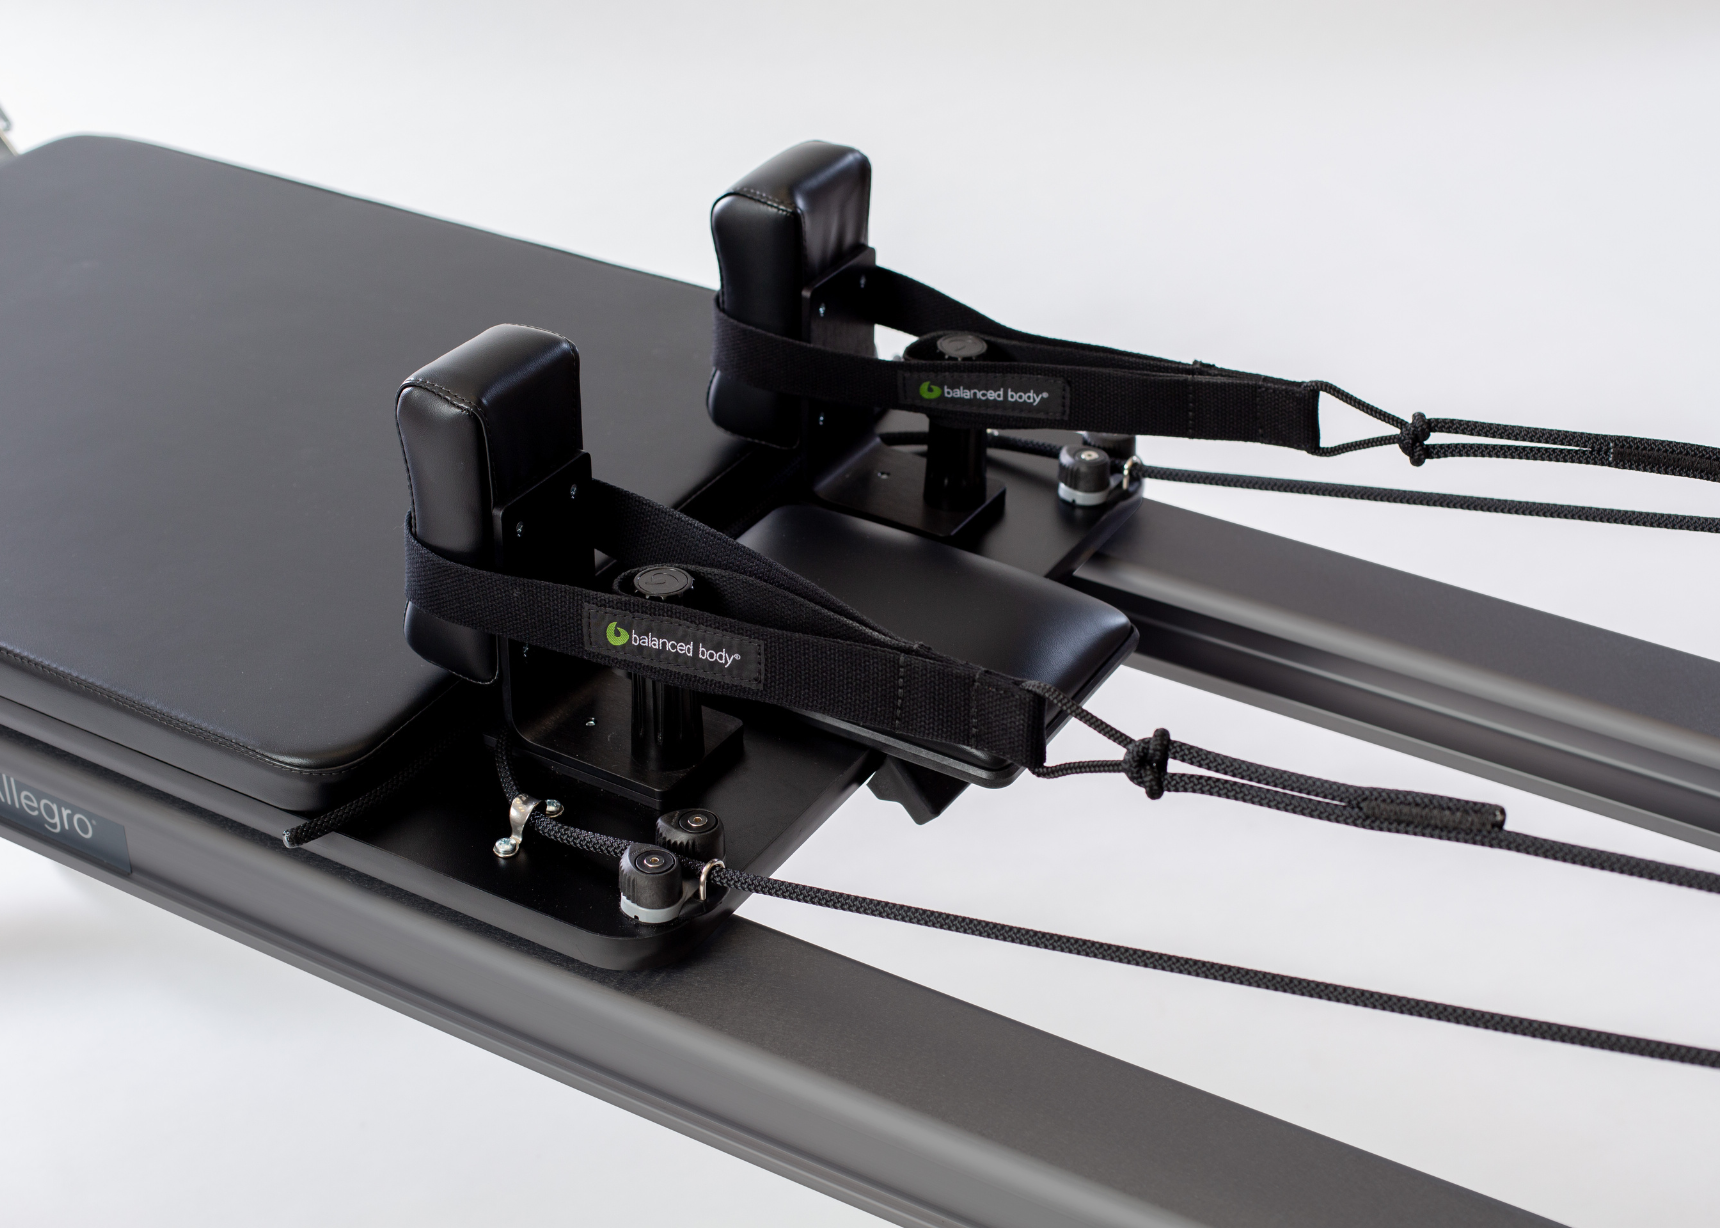 Allegro Reformer with Tower and Mat, with focus on Balanced Body handles.